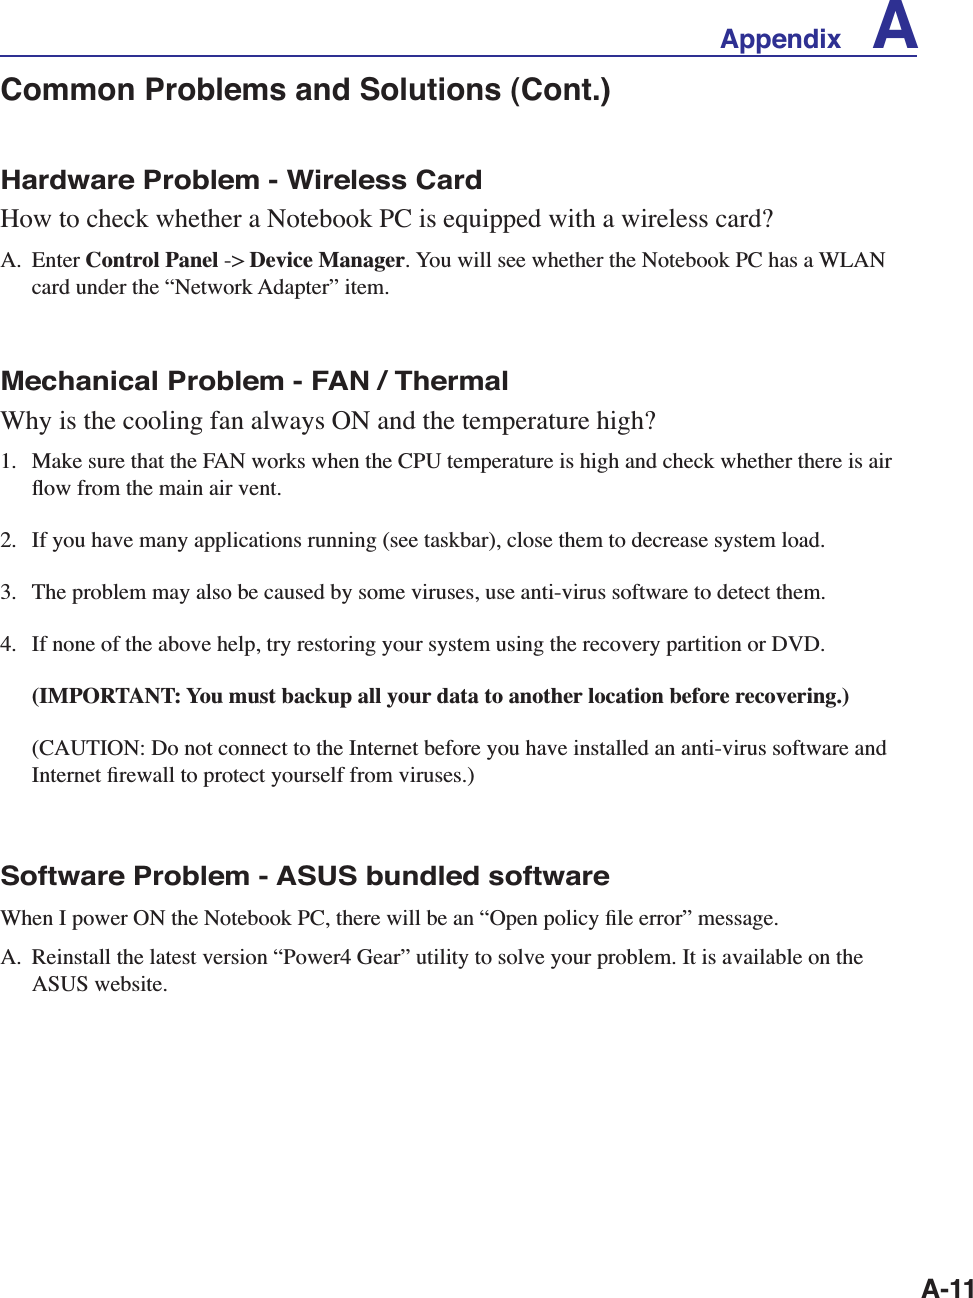 A-11Hardware Problem - Wireless CardHow to check whether a Notebook PC is equipped with a wireless card?A. Enter Control Panel -&gt; Device Manager. You will see whether the Notebook PC has a WLAN card under the “Network Adapter” item.Mechanical Problem - FAN / ThermalWhy is the cooling fan always ON and the temperature high?1.  Make sure that the FAN works when the CPU temperature is high and check whether there is air ﬂow from the main air vent. 2.  If you have many applications running (see taskbar), close them to decrease system load. 3.  The problem may also be caused by some viruses, use anti-virus software to detect them.4.  If none of the above help, try restoring your system using the recovery partition or DVD.  (IMPORTANT: You must backup all your data to another location before recovering.)  (CAUTION: Do not connect to the Internet before you have installed an anti-virus software and Internet ﬁrewall to protect yourself from viruses.)Software Problem - ASUS bundled softwareWhen I power ON the Notebook PC, there will be an “Open policy ﬁle error” message.A.  Reinstall the latest version “Power4 Gear” utility to solve your problem. It is available on the ASUS website.Common Problems and Solutions (Cont.)Appendix    A